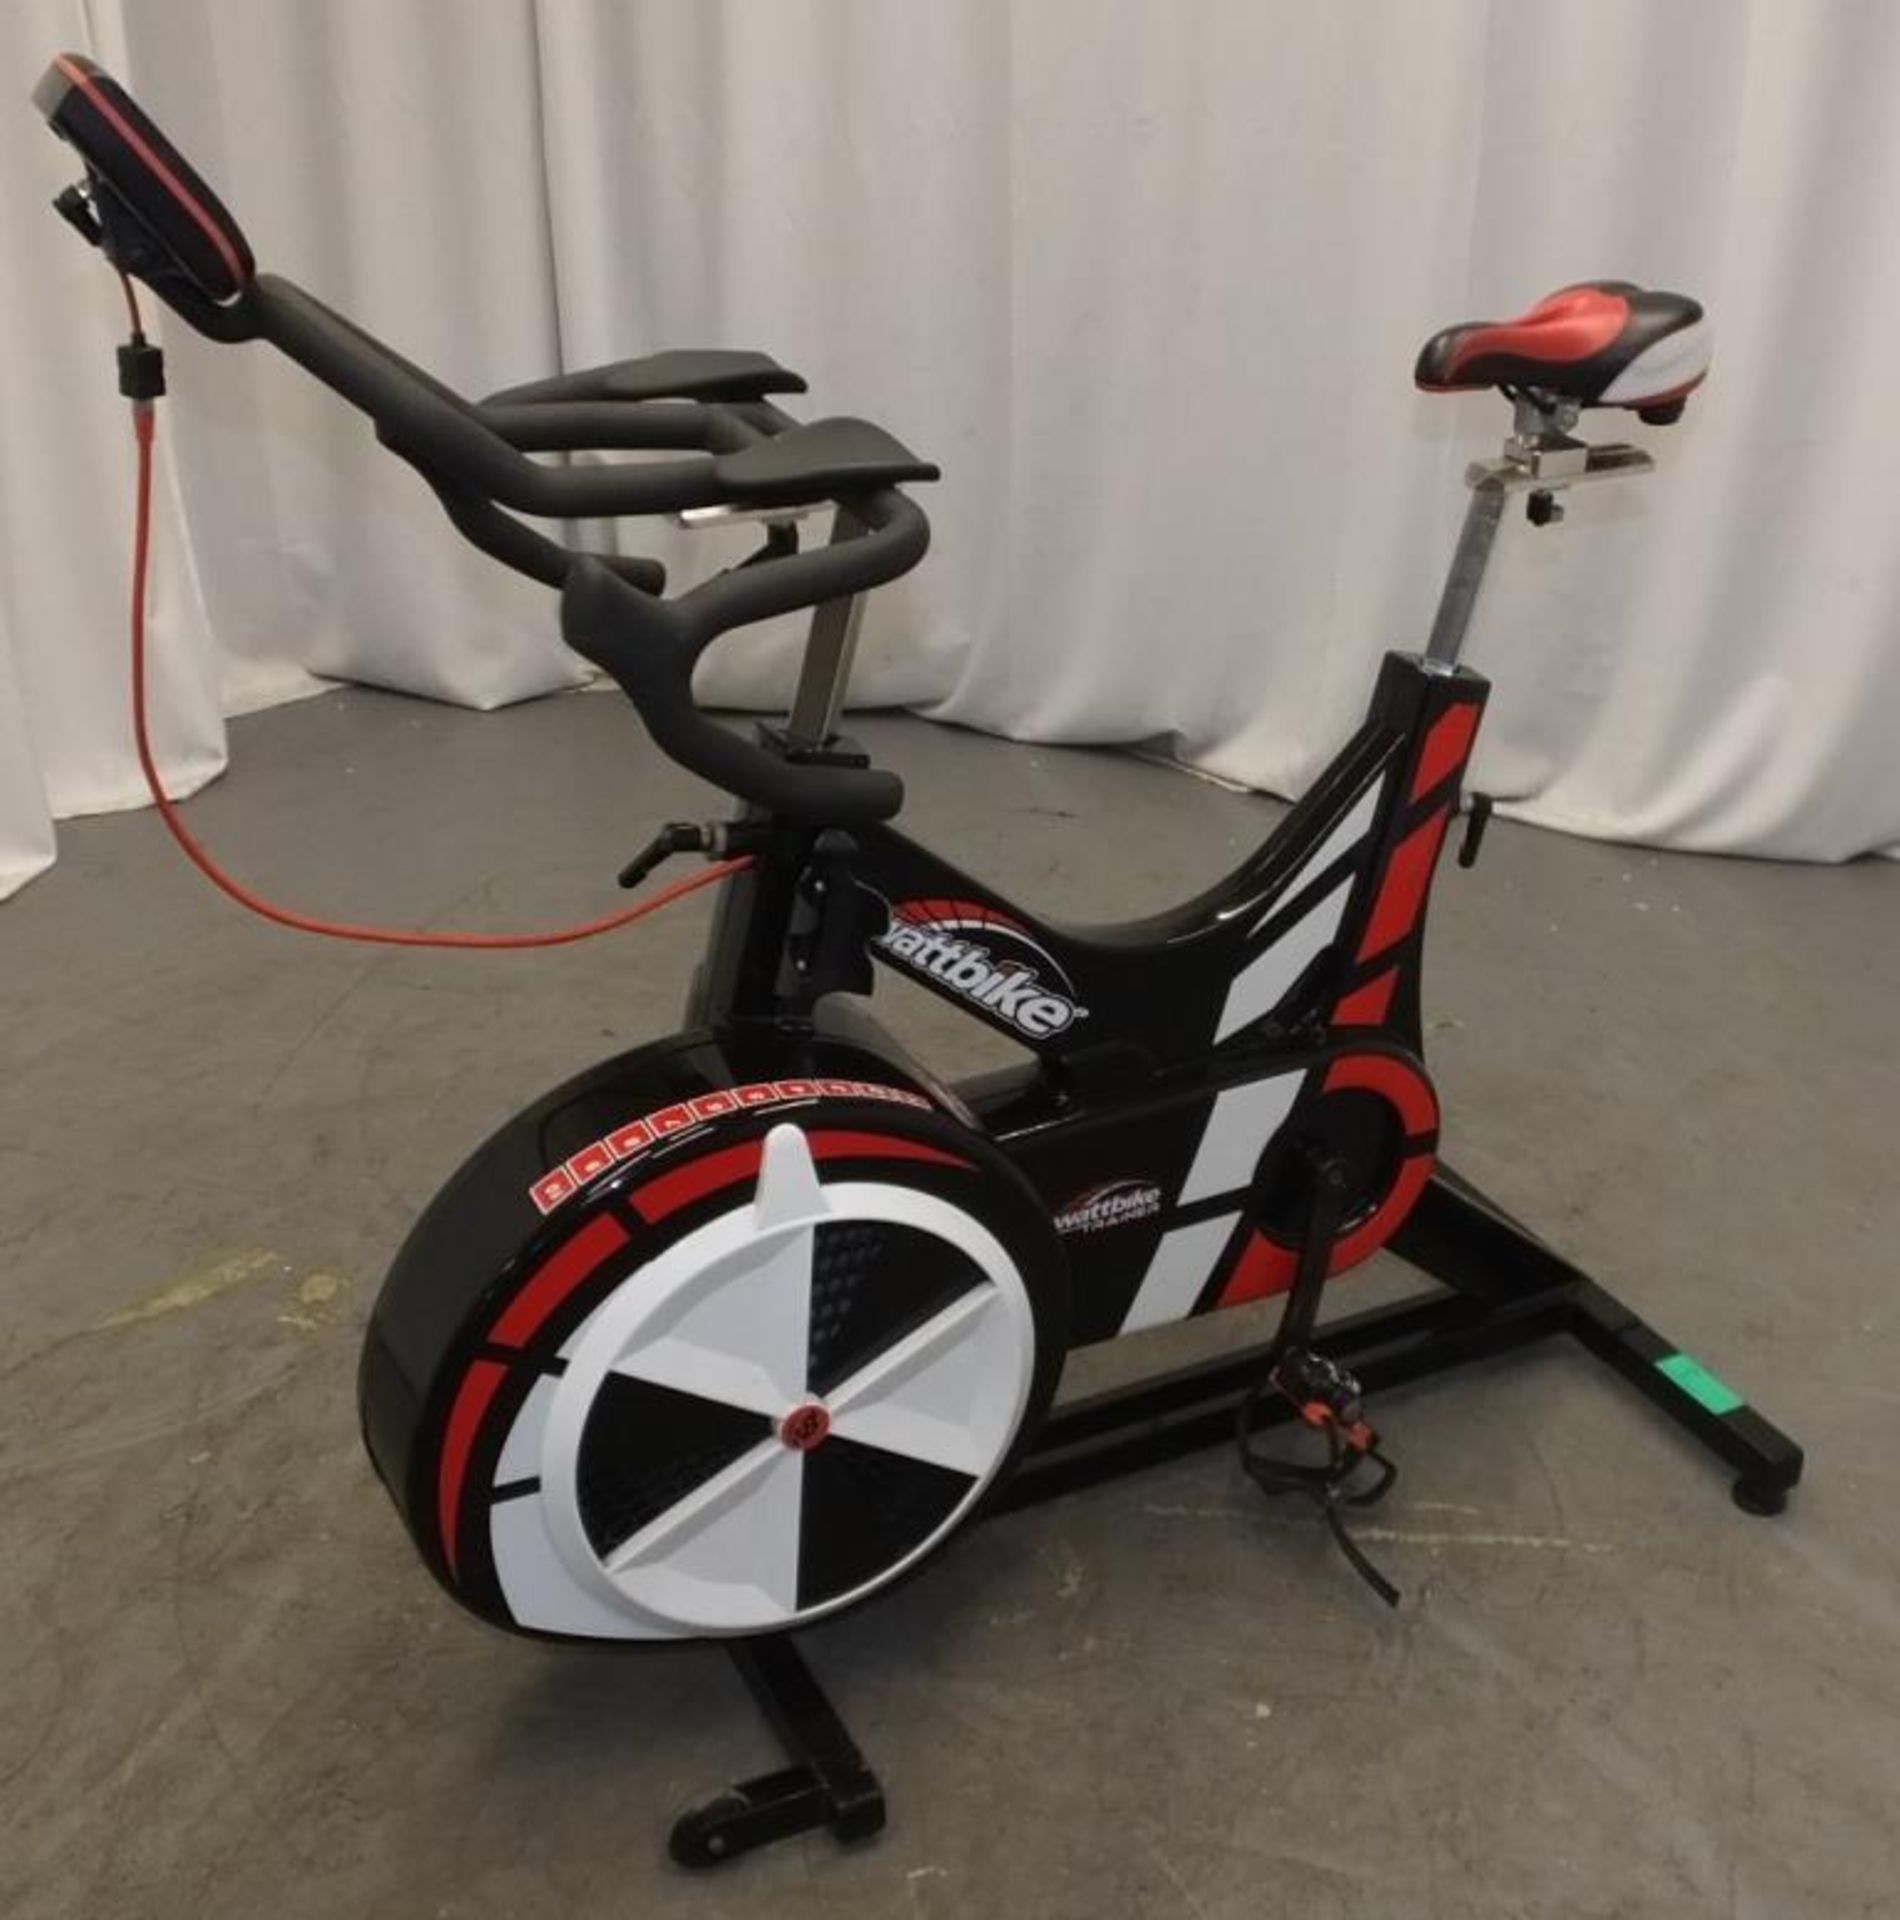 Wattbike Trainer Training Exercise Bike - console powers up - functionality untested - bent cable